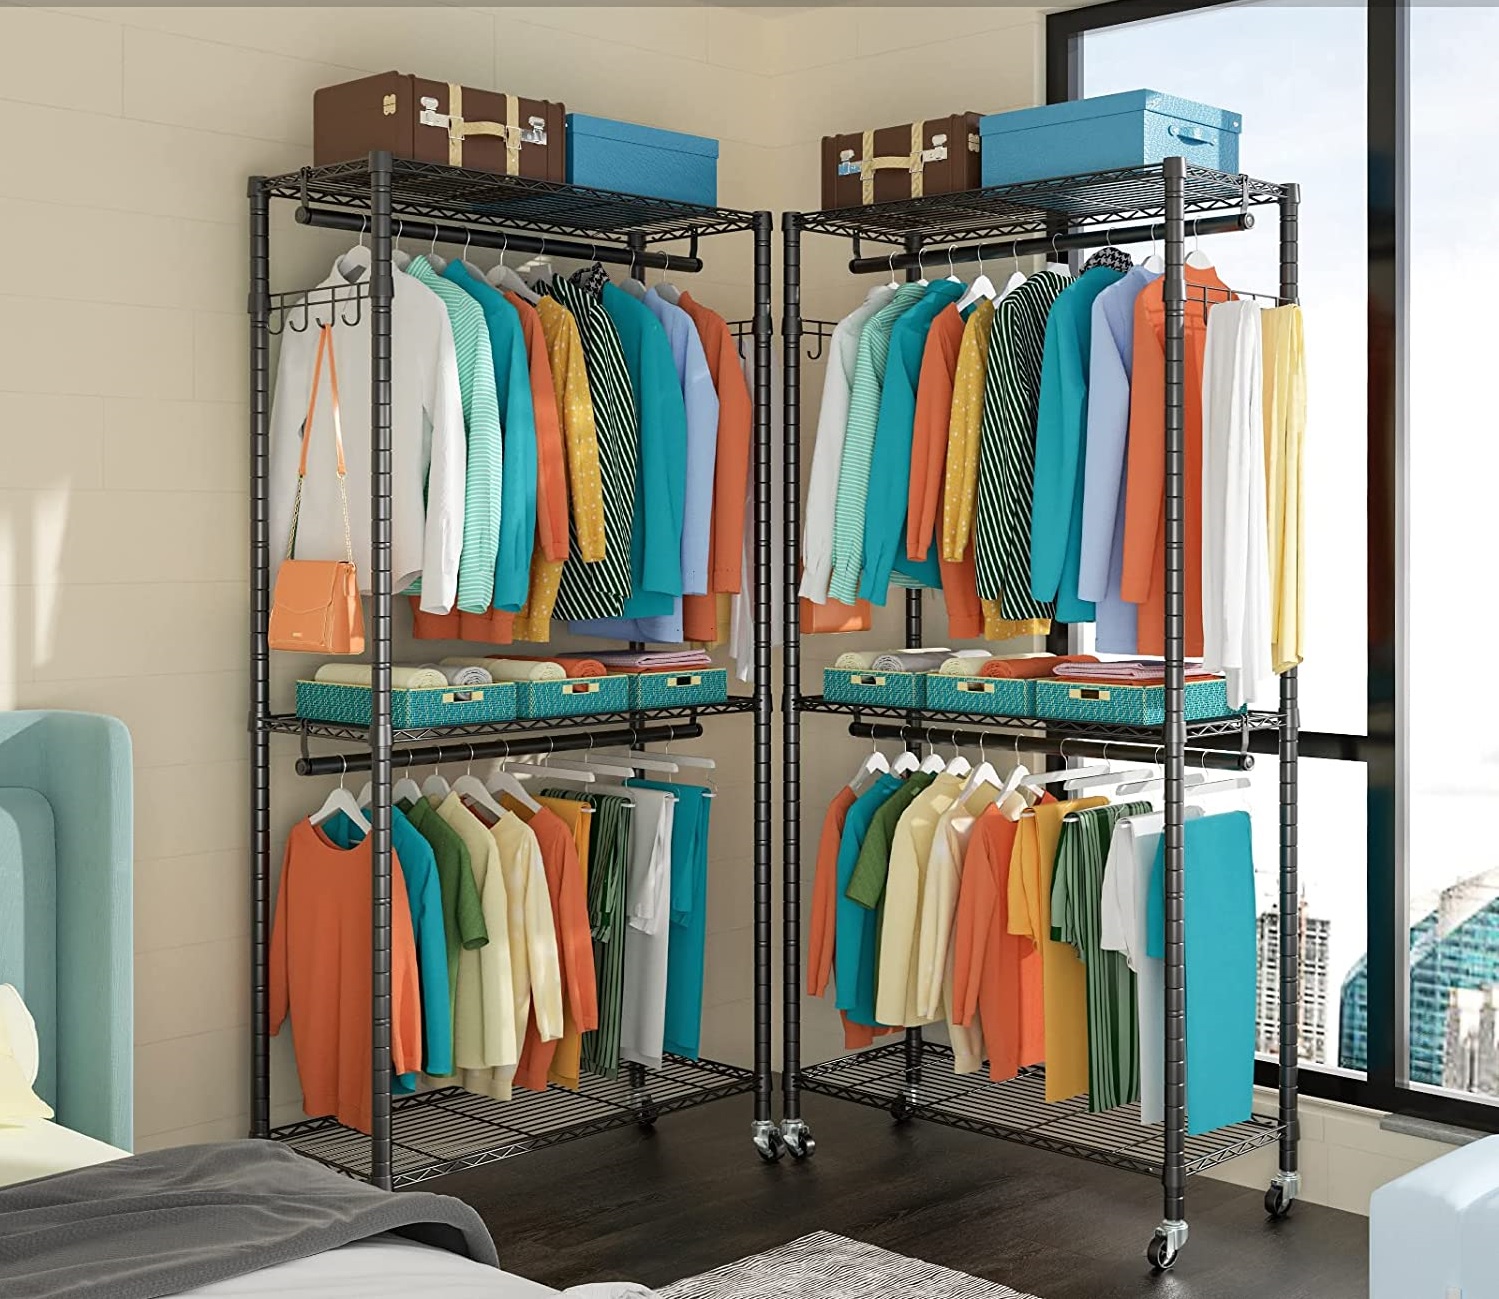 How To Turn Bedroom Into Closet